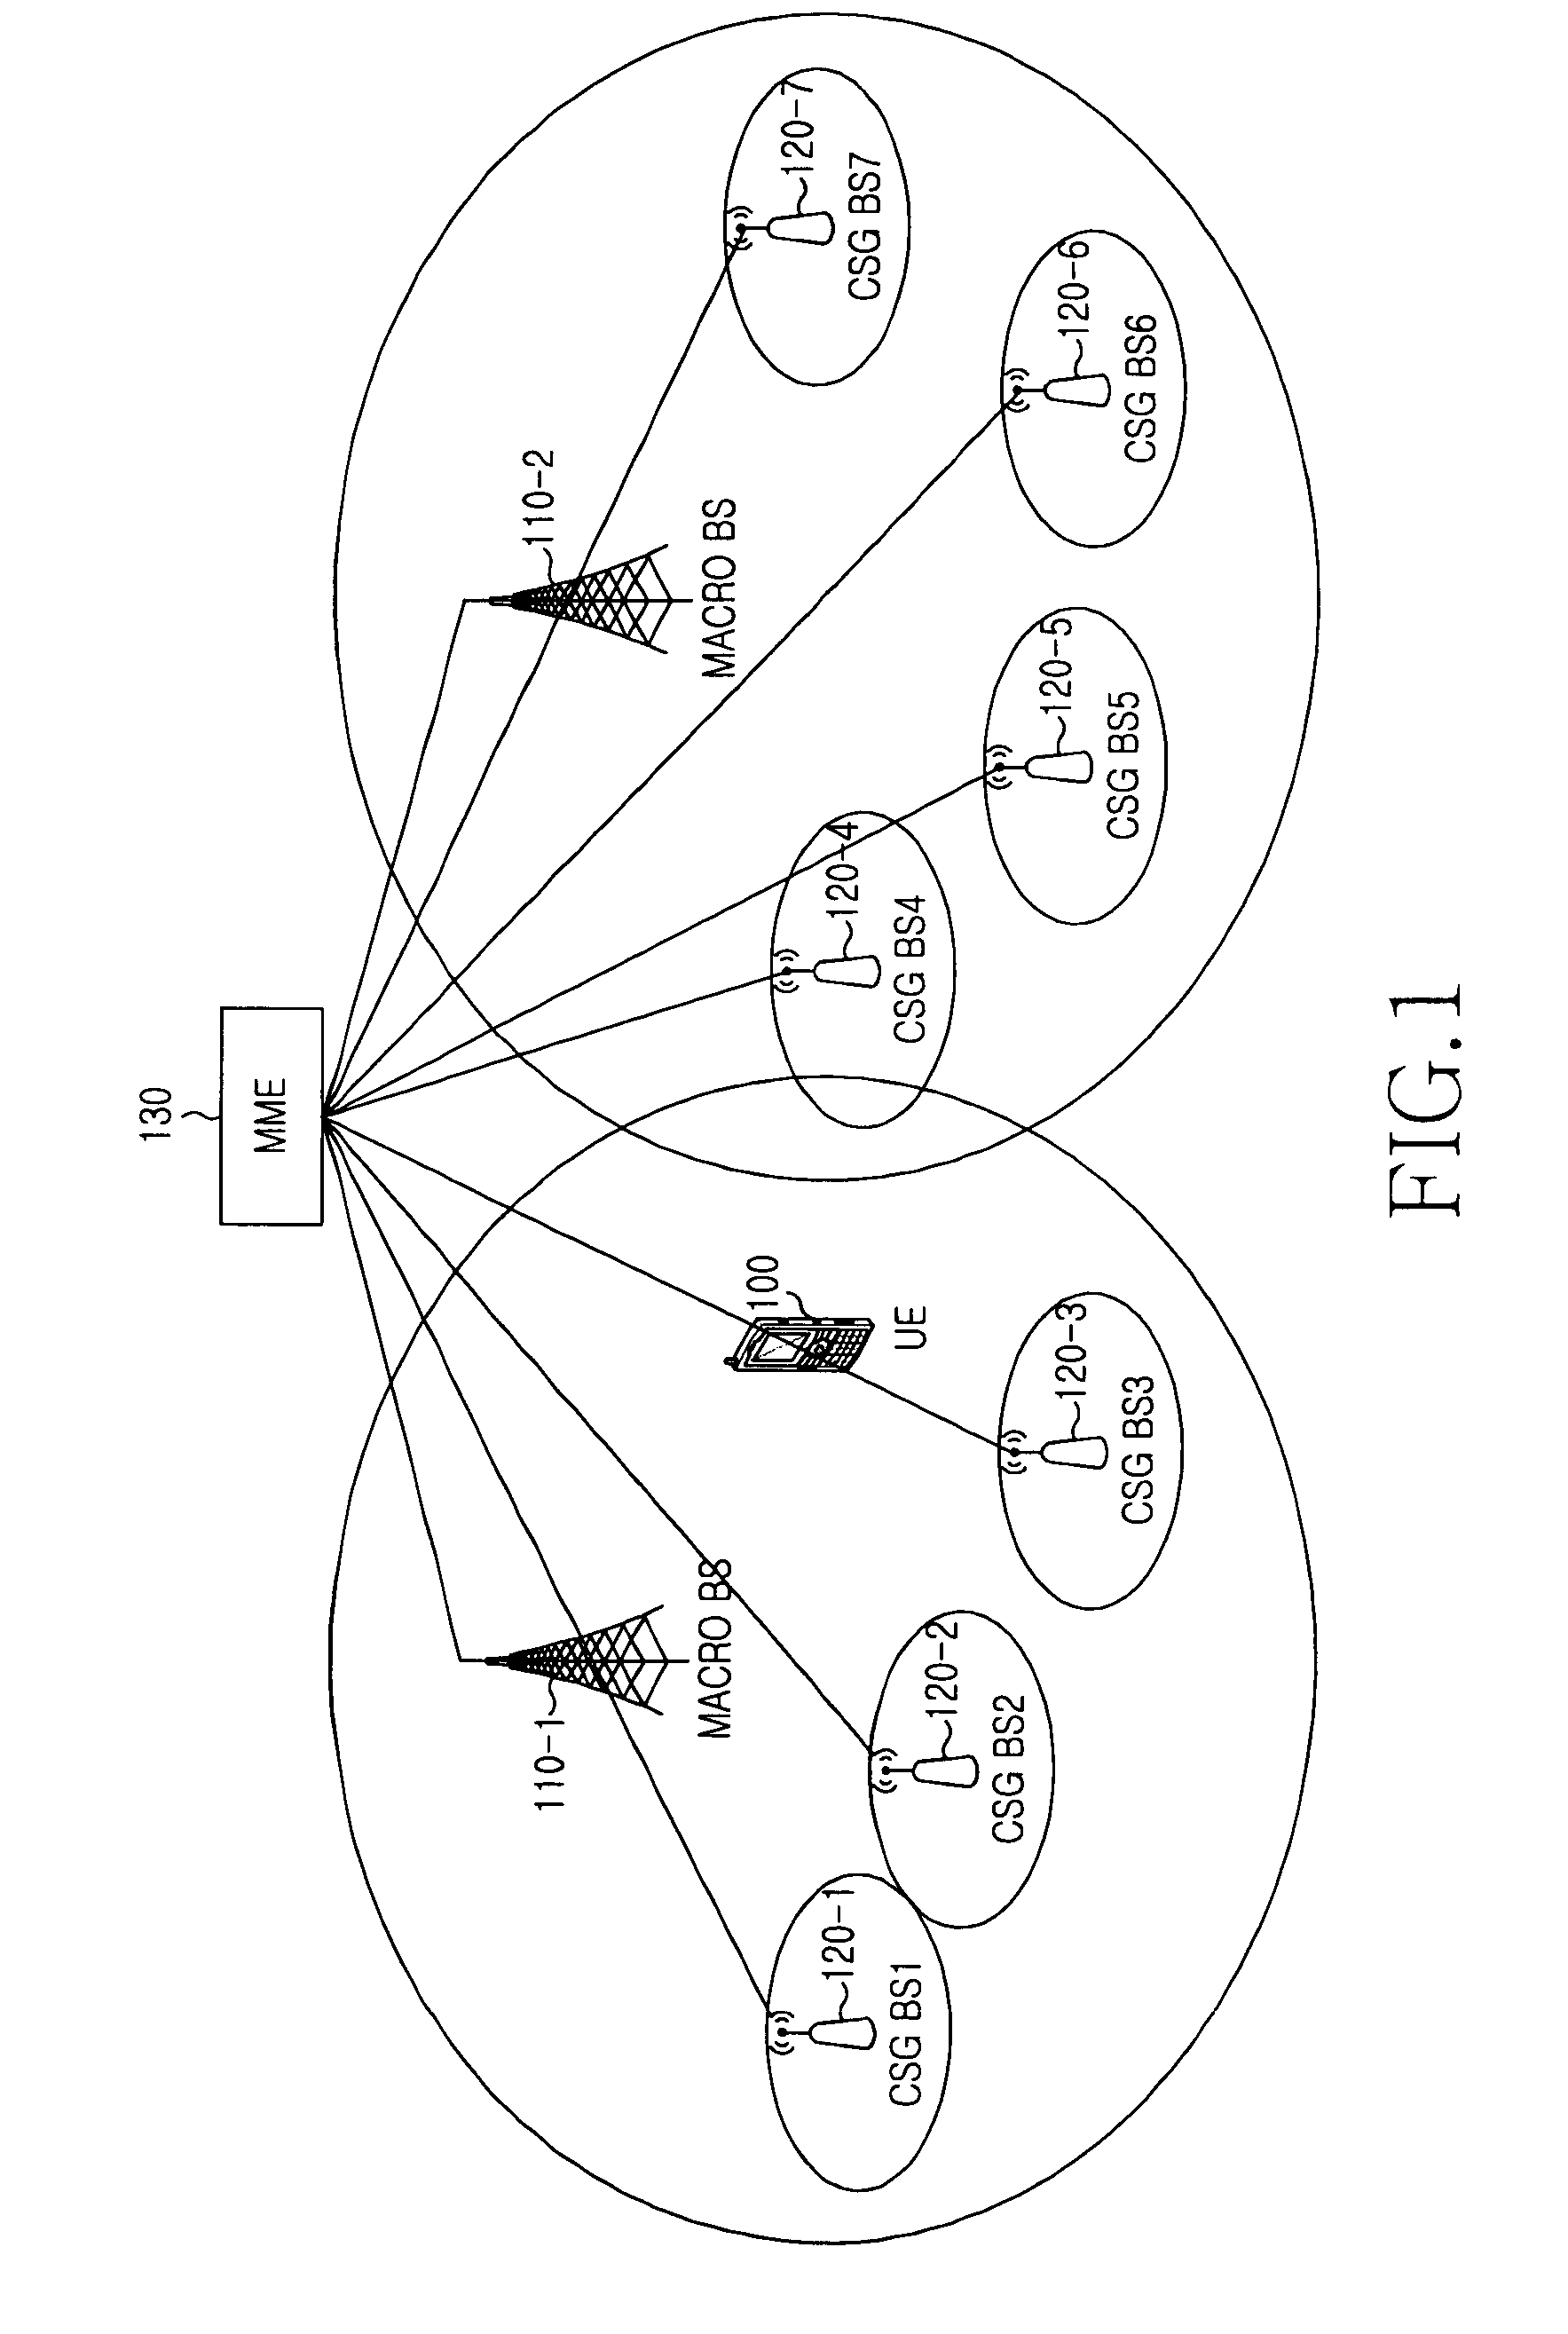 Apparatus and method for automatically searching for low-power base station supporting access of registered user in mobile communication system